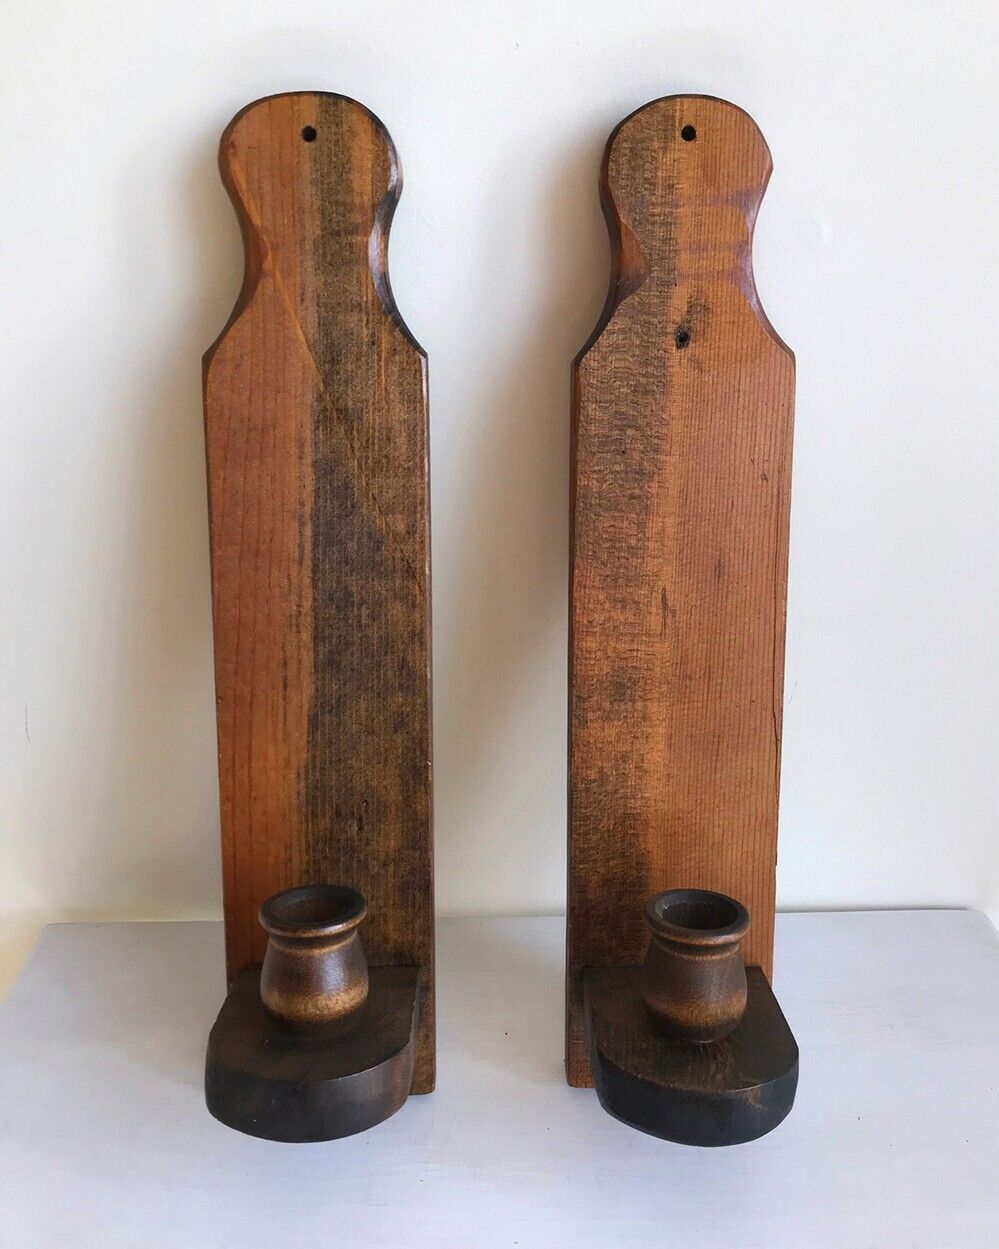 Two Vintage Hand Crafted Wooden Candlestick Candle Holder Wall Walnut Stained